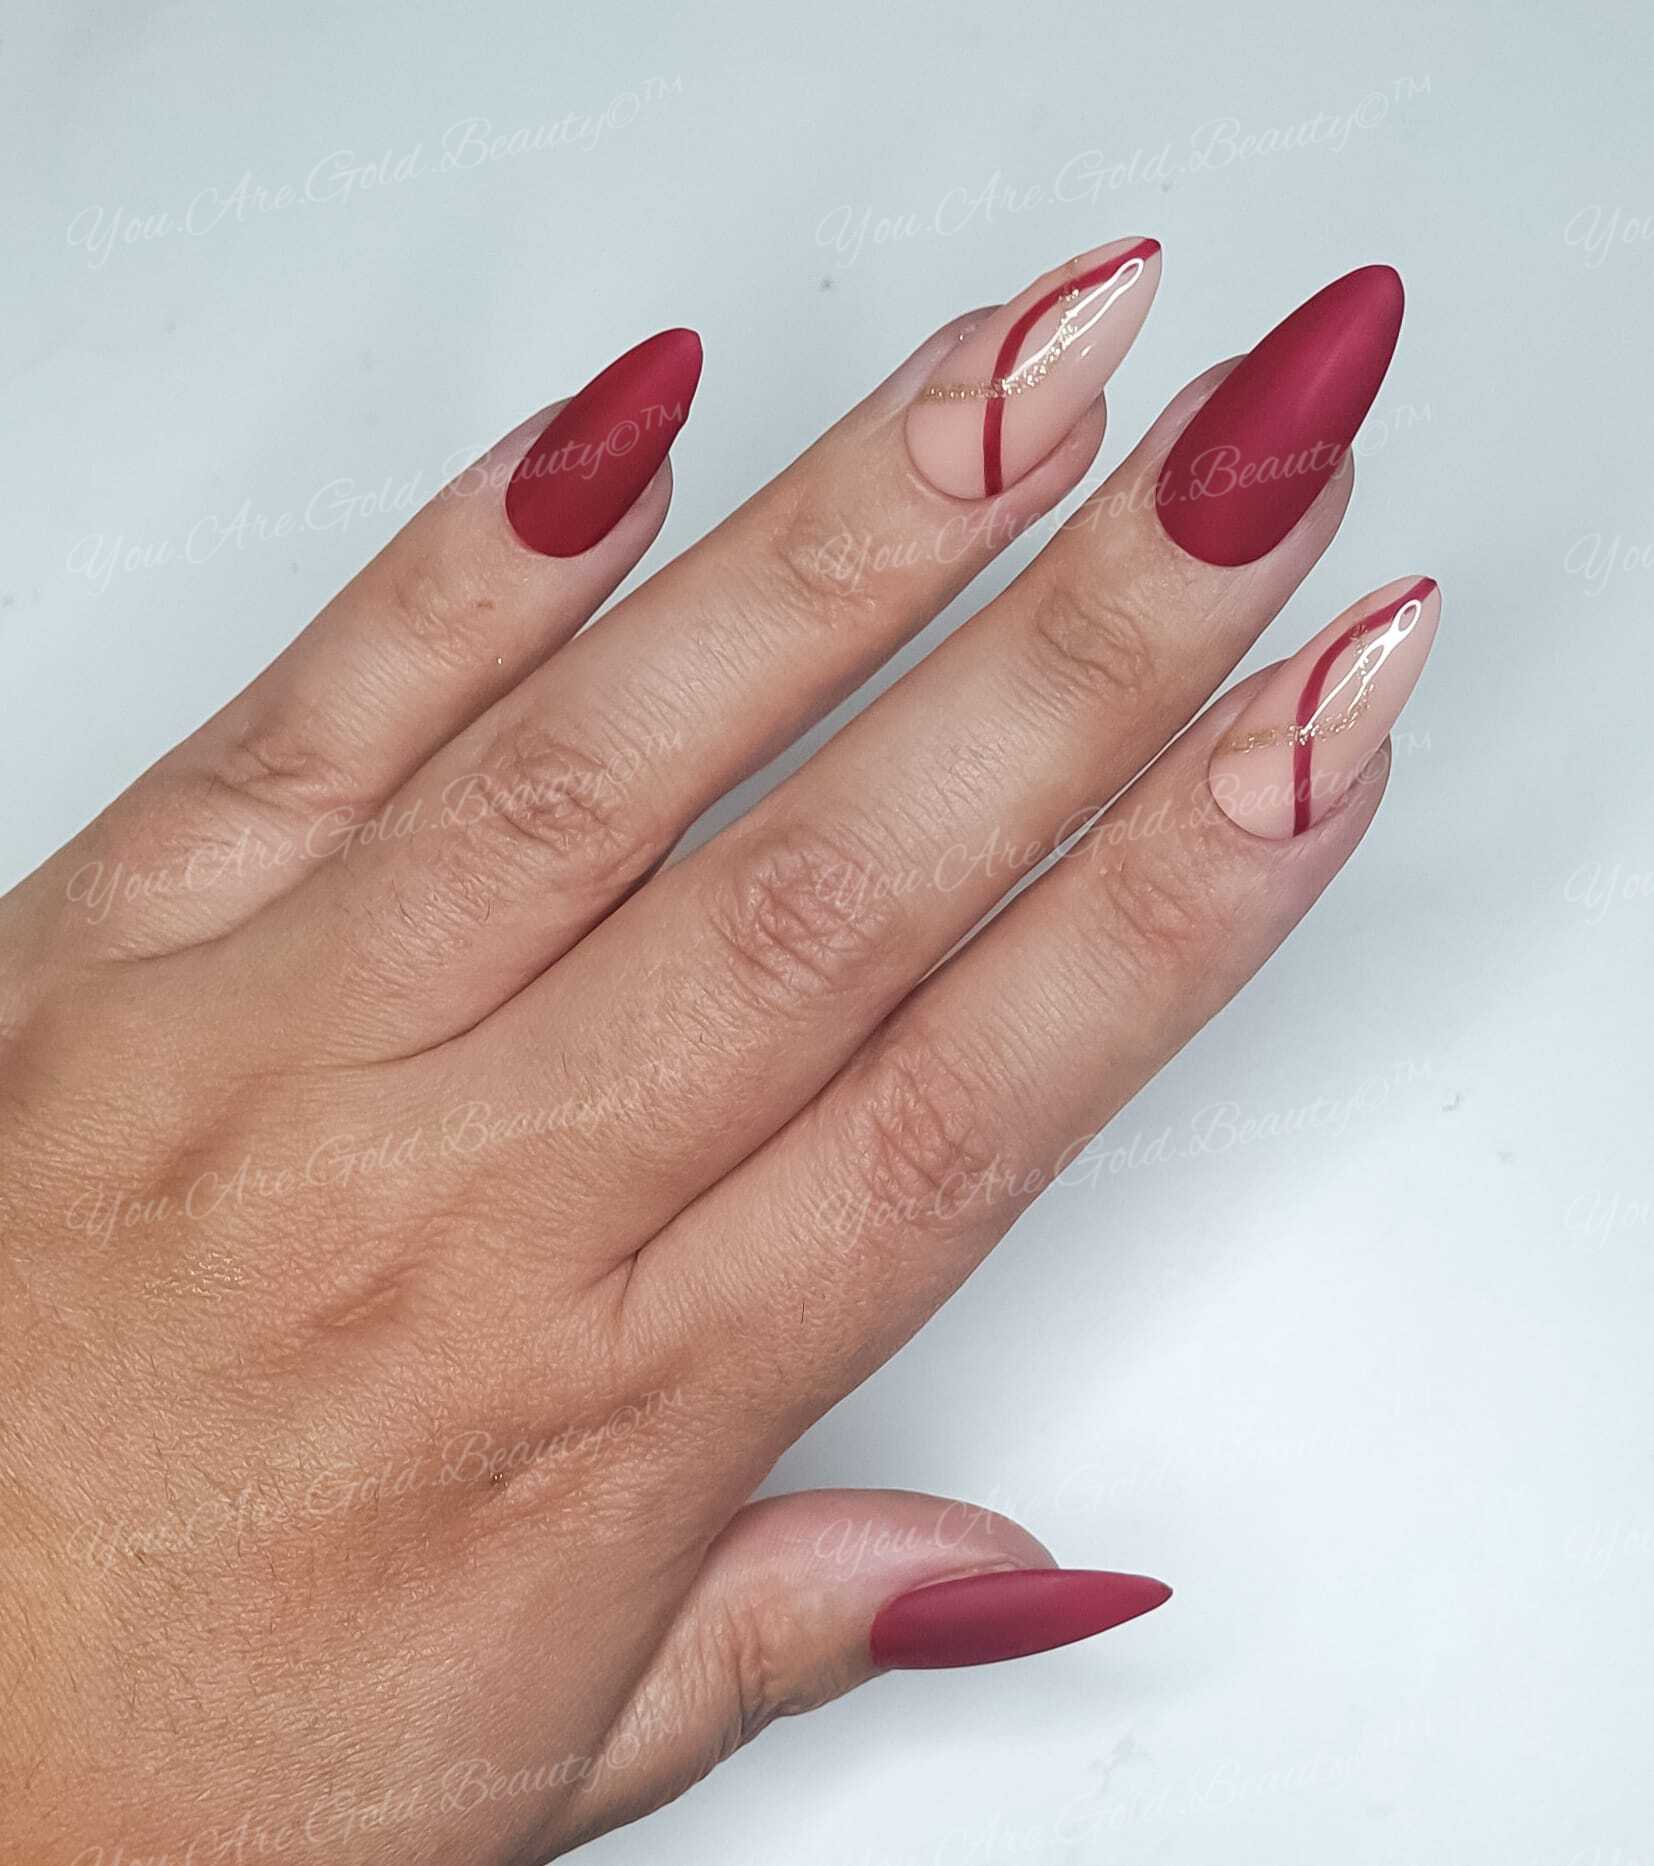 Red and gold press on nails uk with gold glitter almond shaped nails 